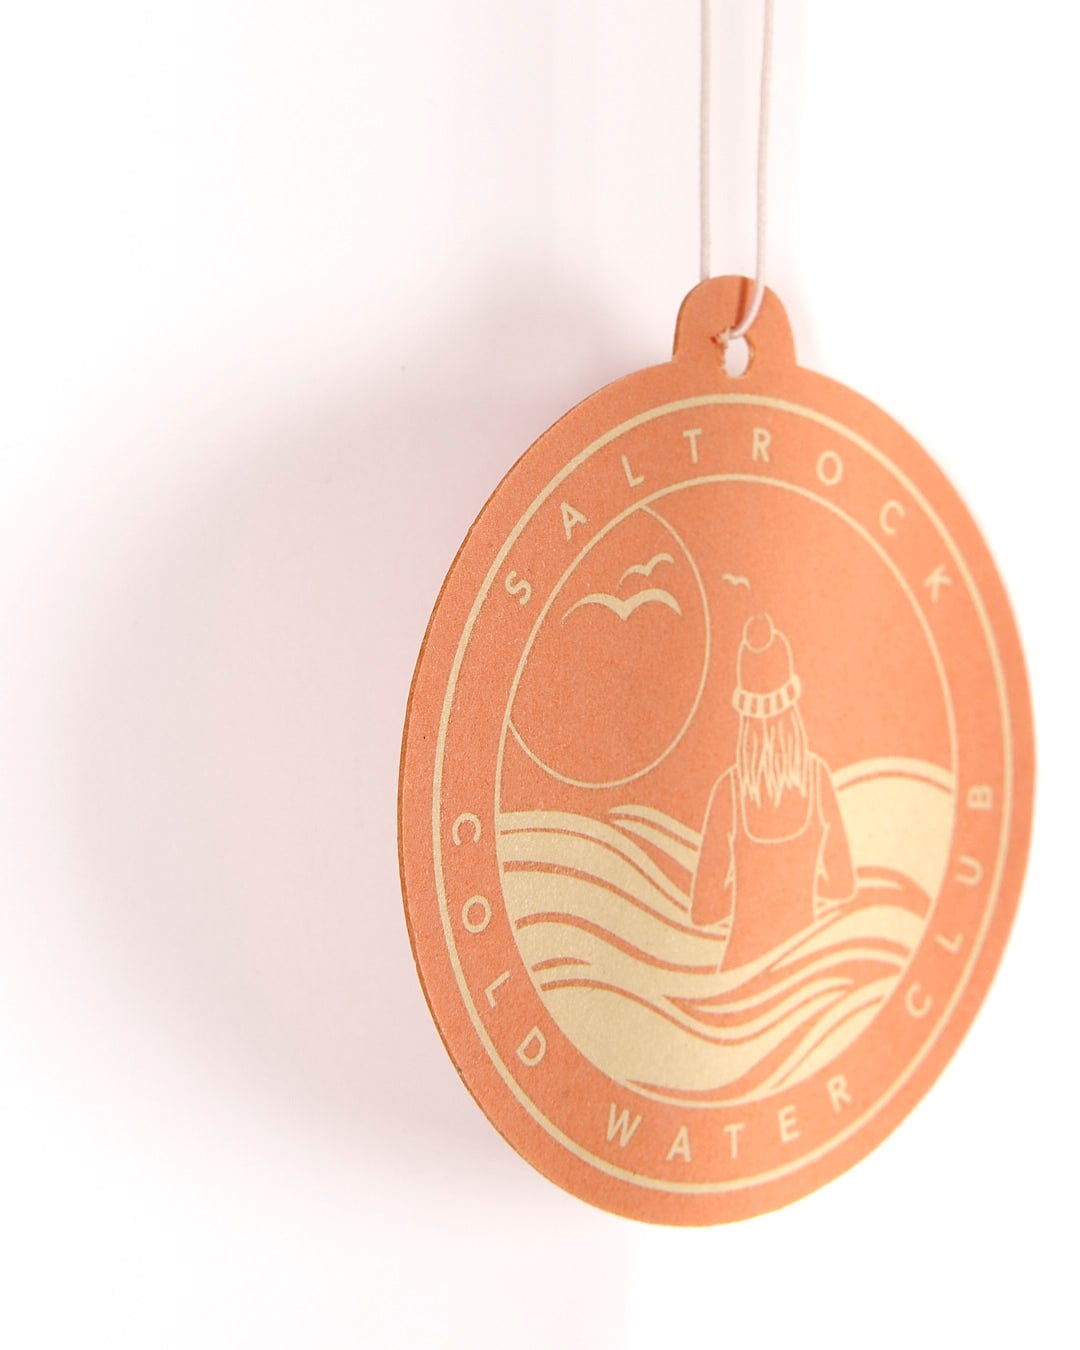 This Cold Water Club - Air Freshener, created by Saltrock, features a boat image, perfect for cold water adventures.